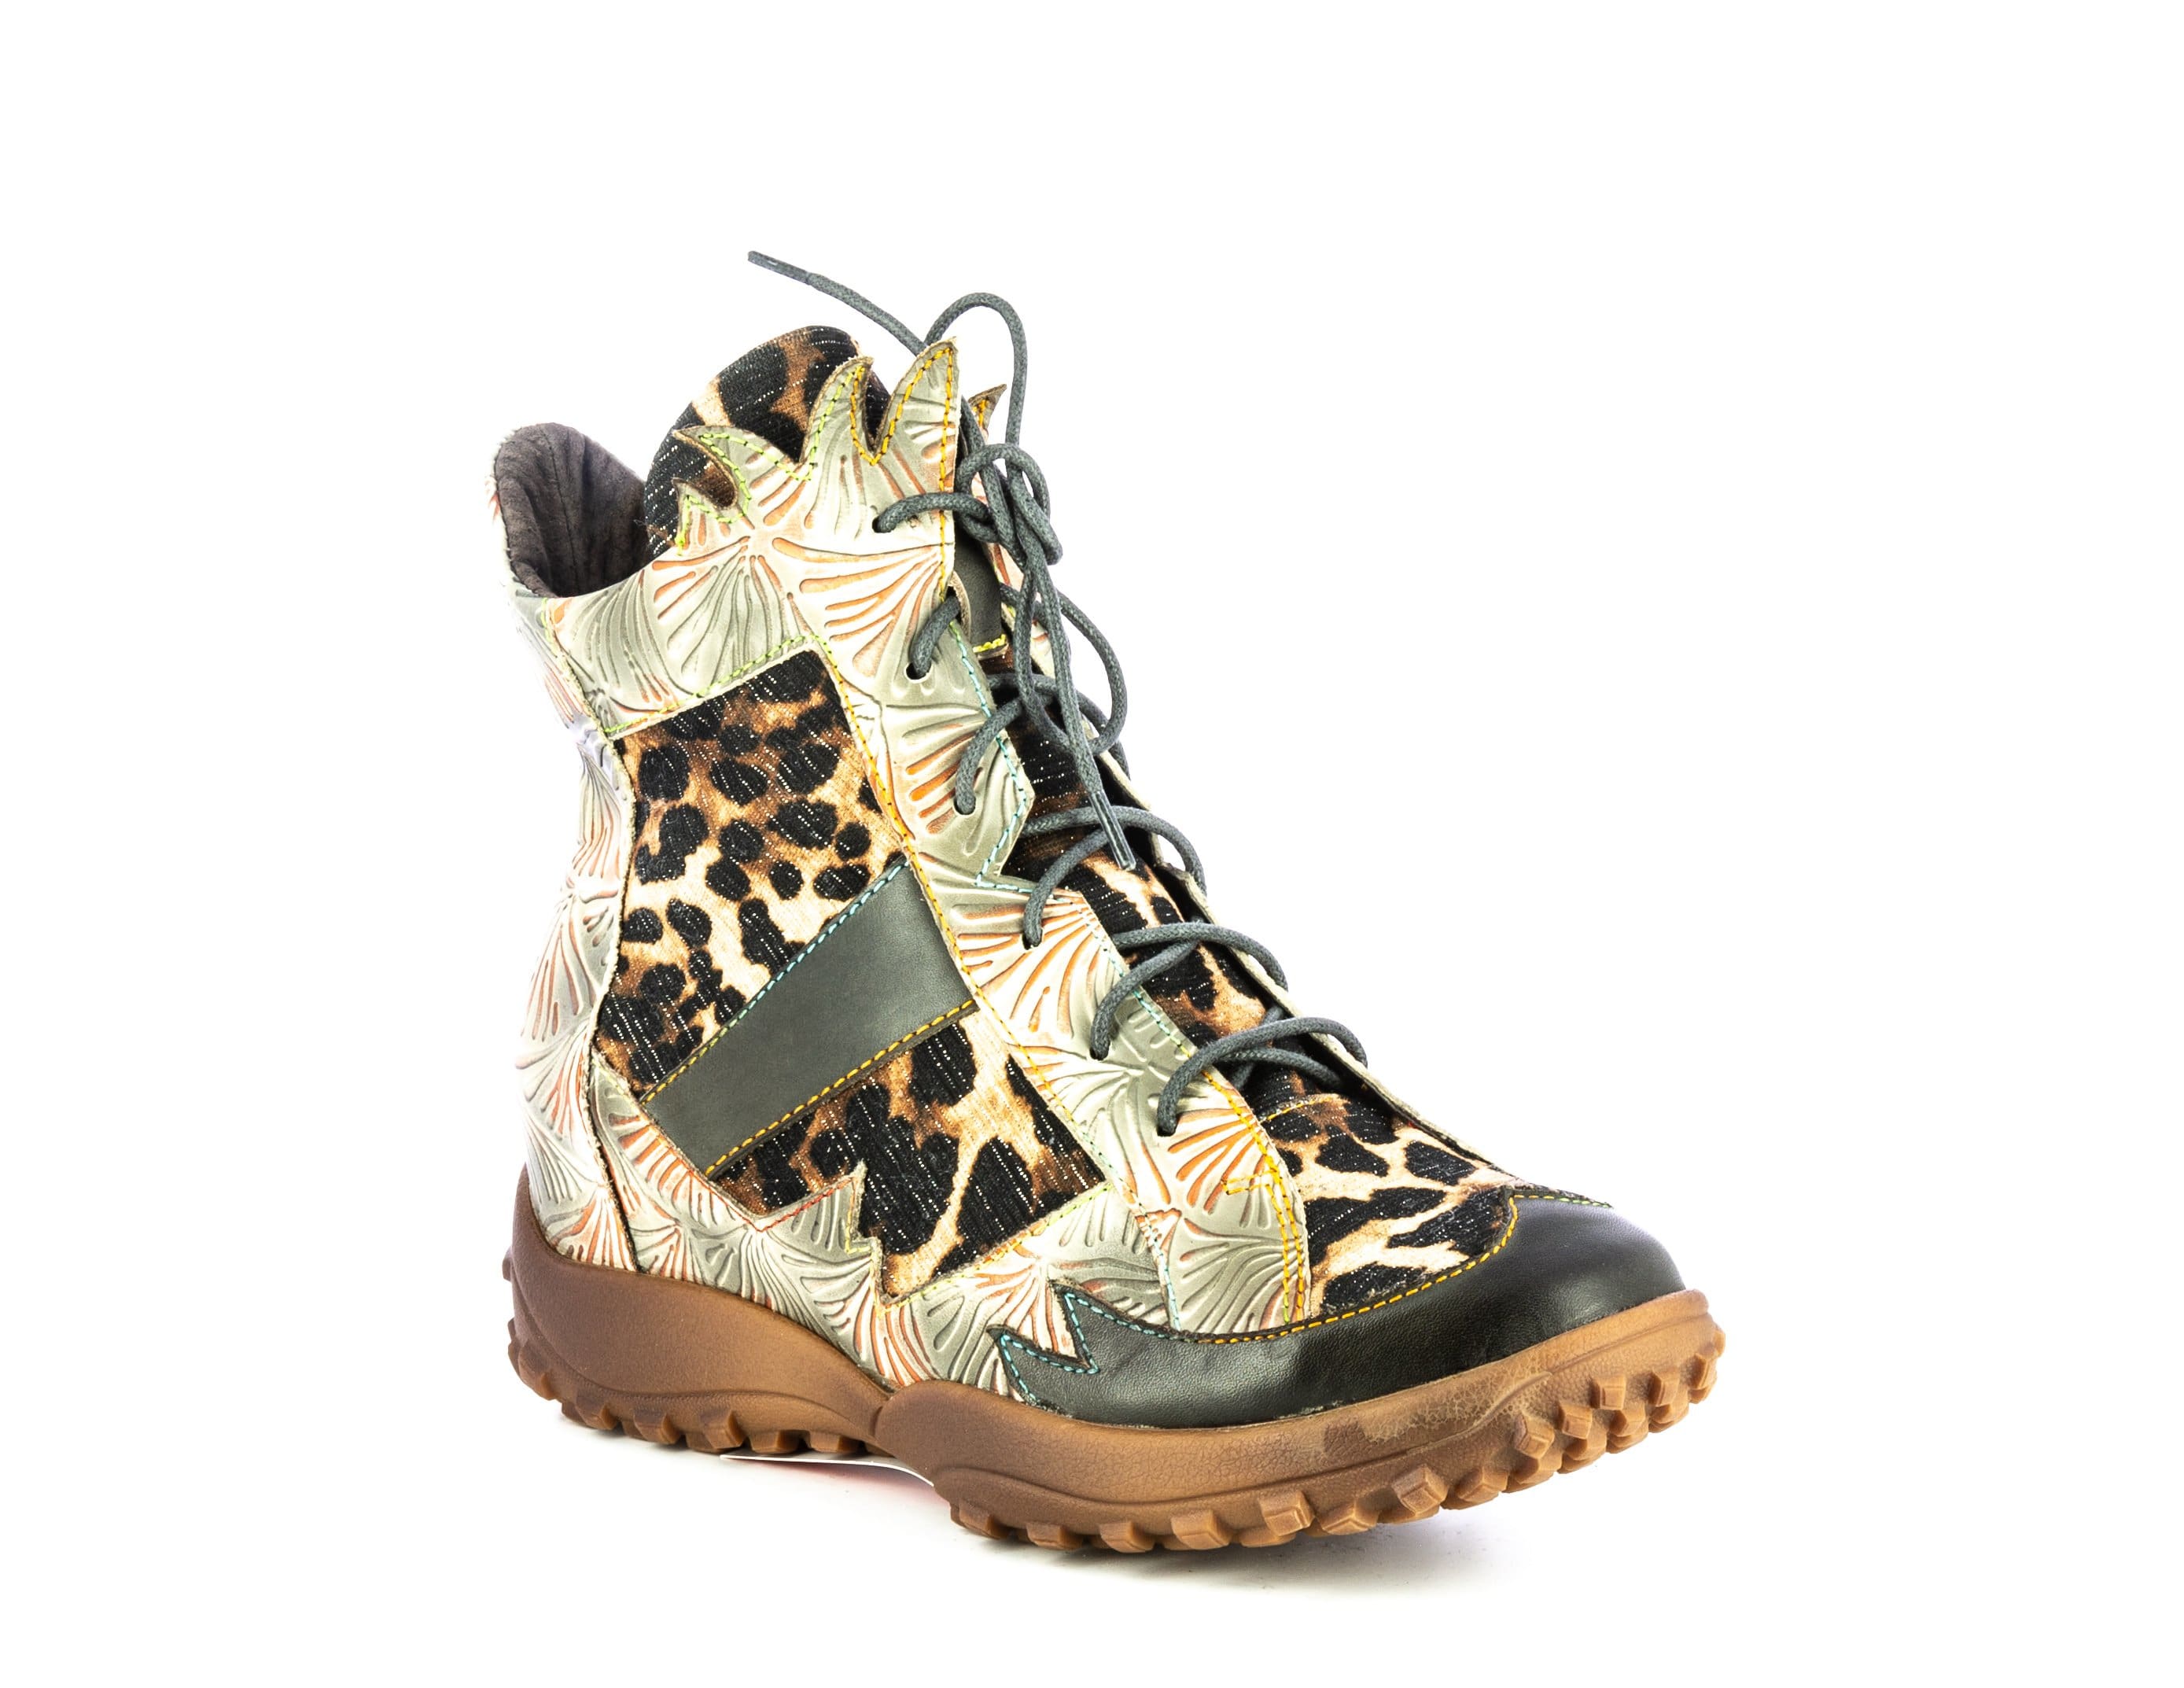 Schuh CYCNTHIAO 03 - Stiefeletten